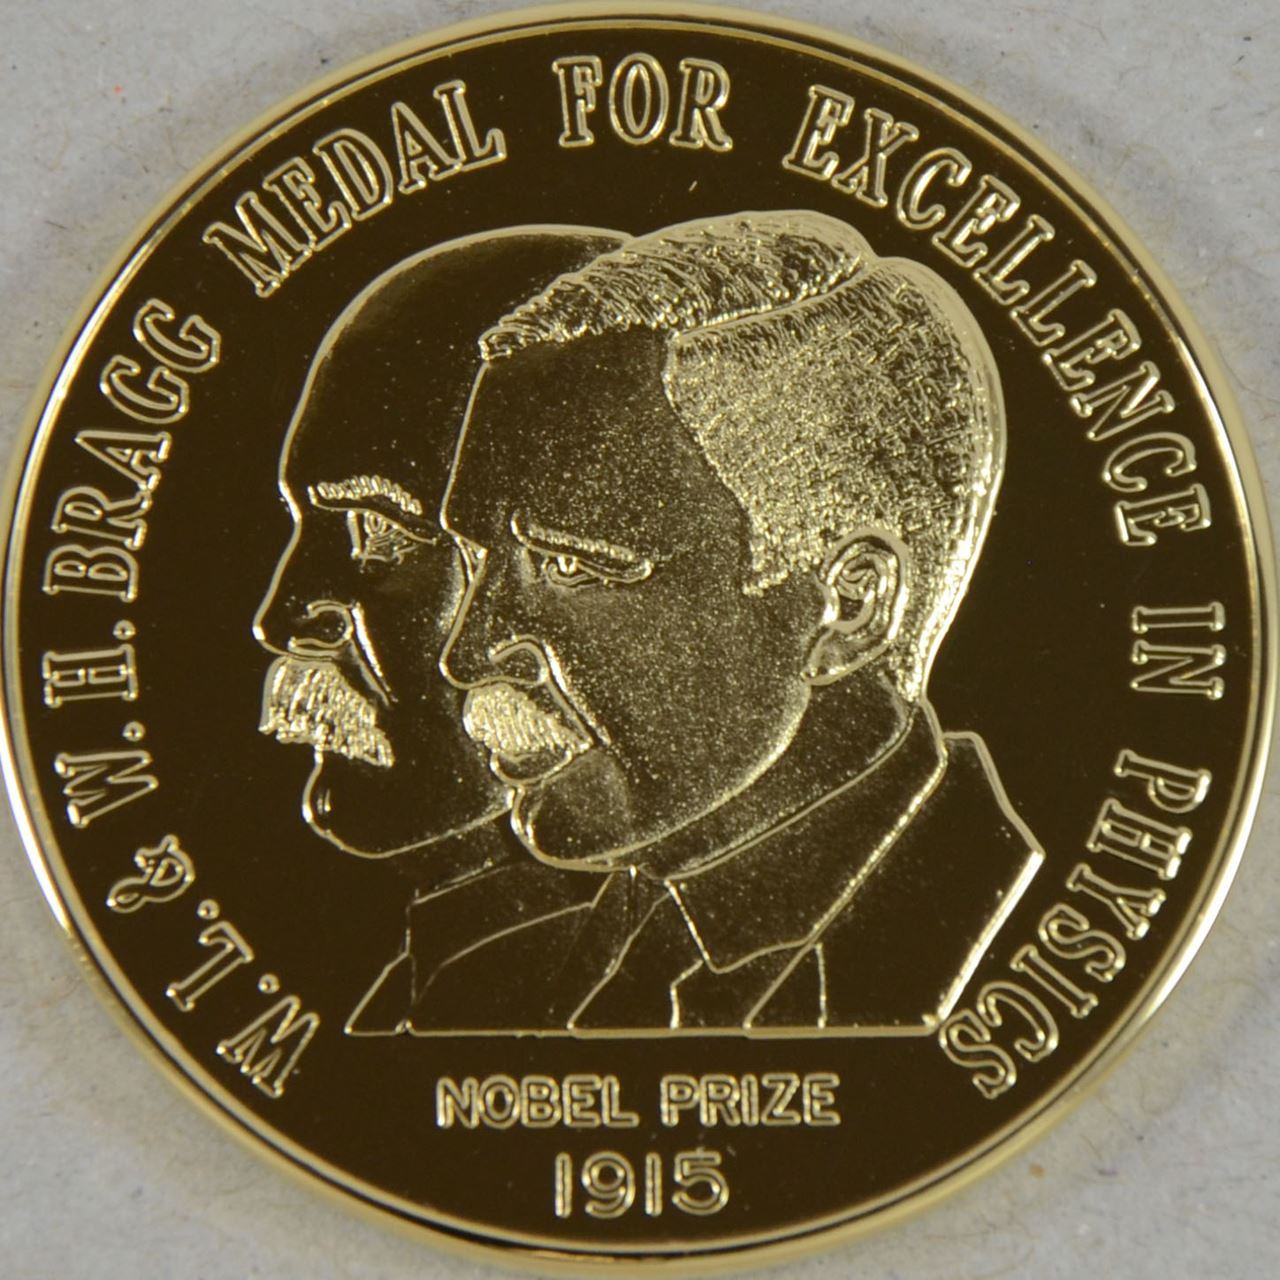 The Bragg Gold Medal, which depicts in profile Sir Laurence Bragg and his father Sir William Bragg